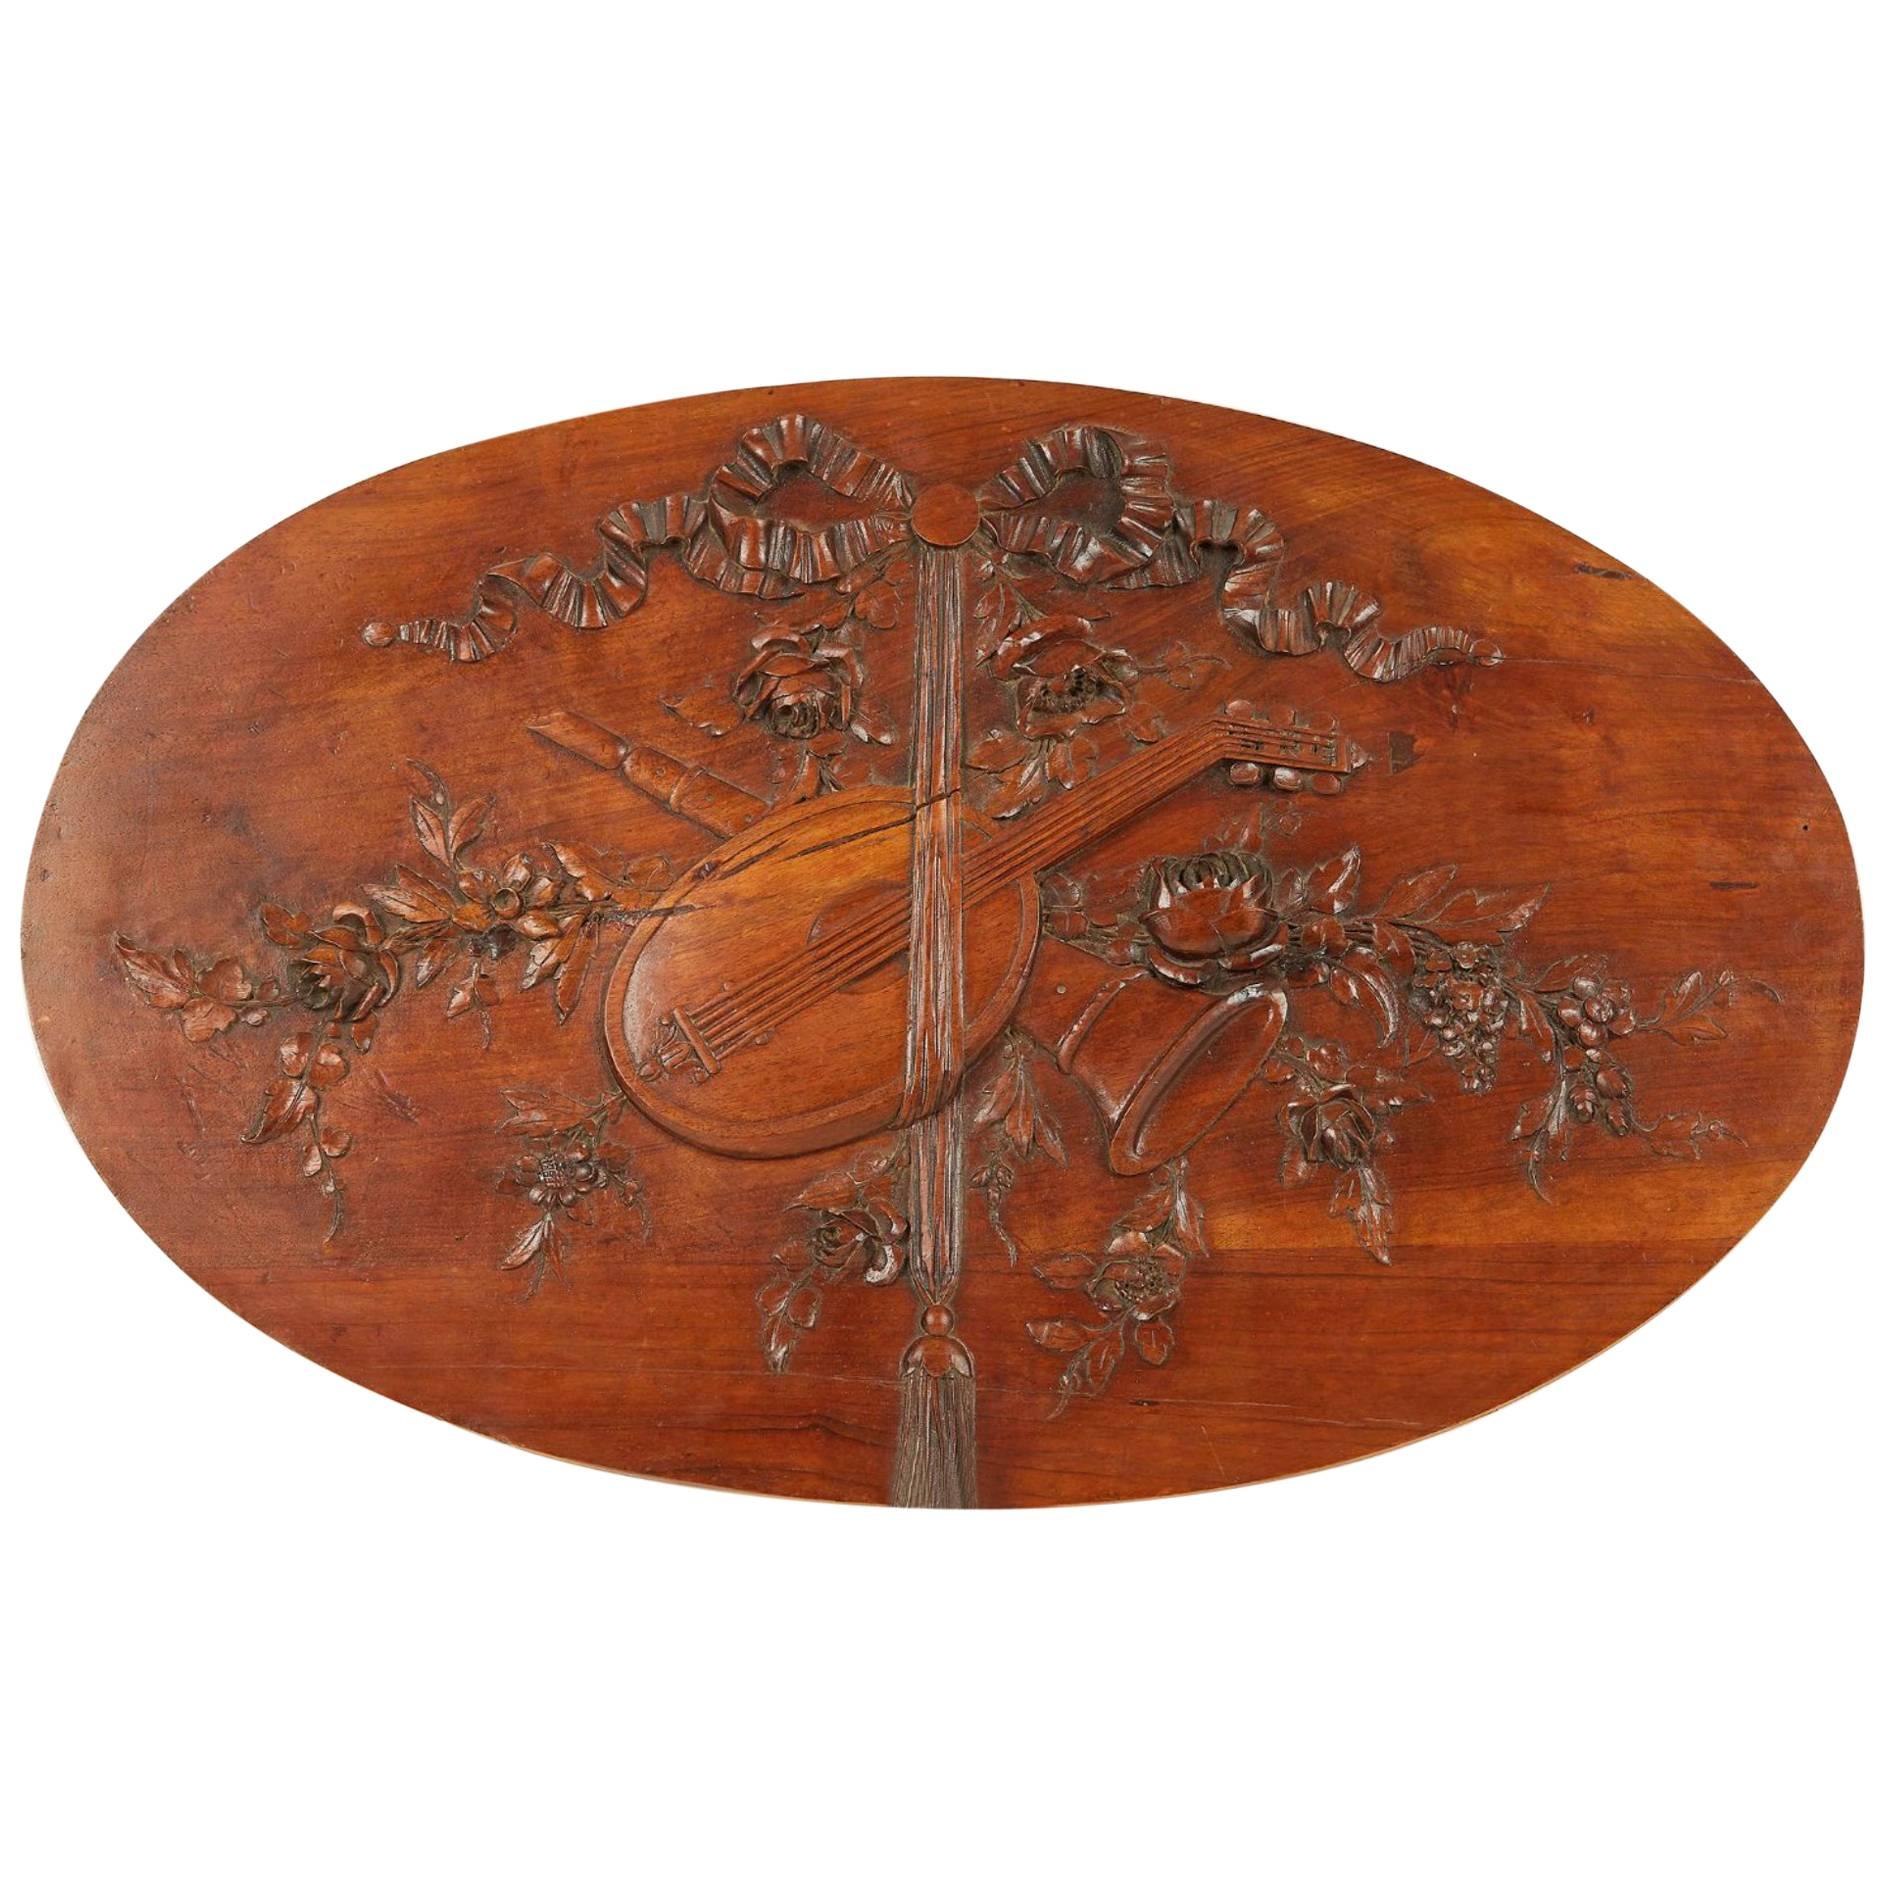 19th Century Exceptional French Decoration with Musical Instruments and Flowers